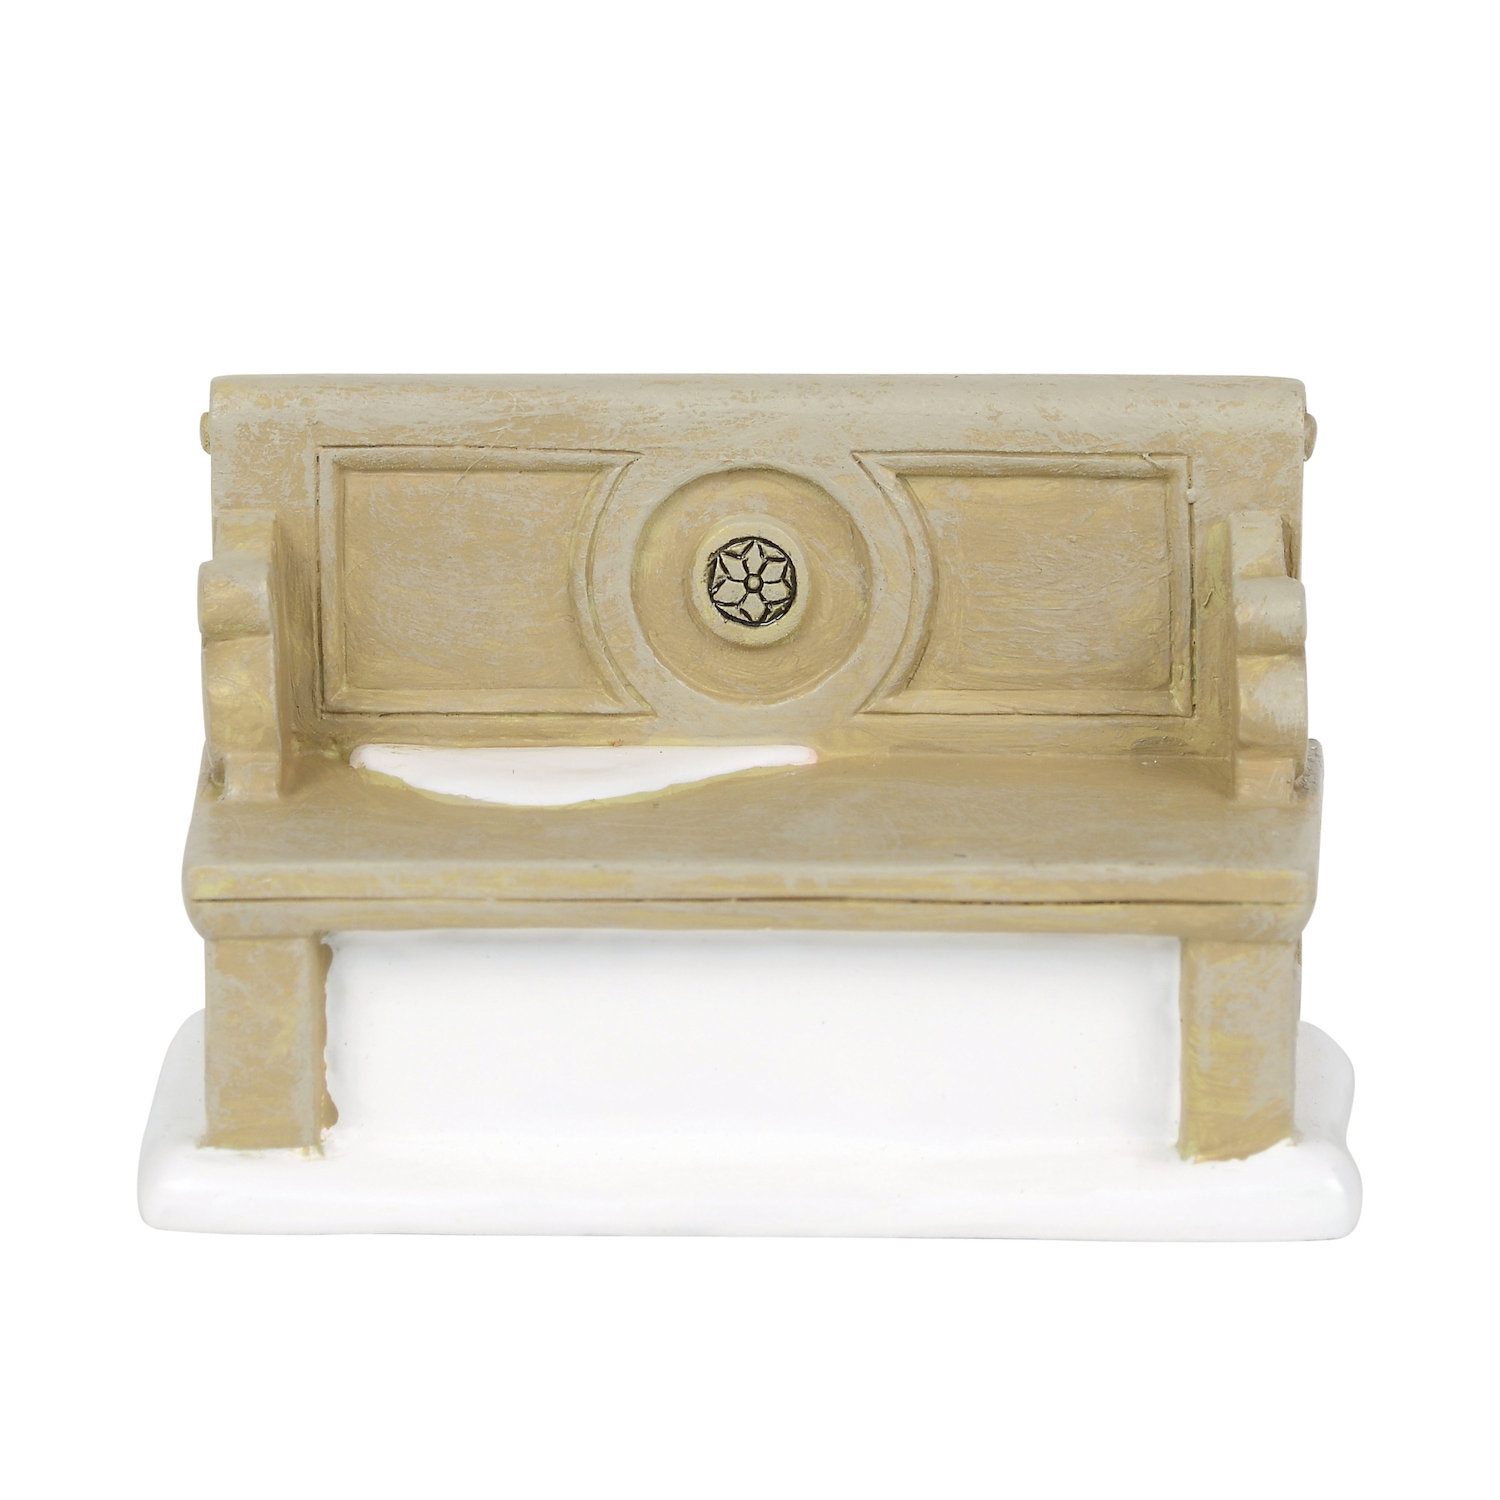 Department 56 Cross Village Product Classic Christmas Bench Accessory